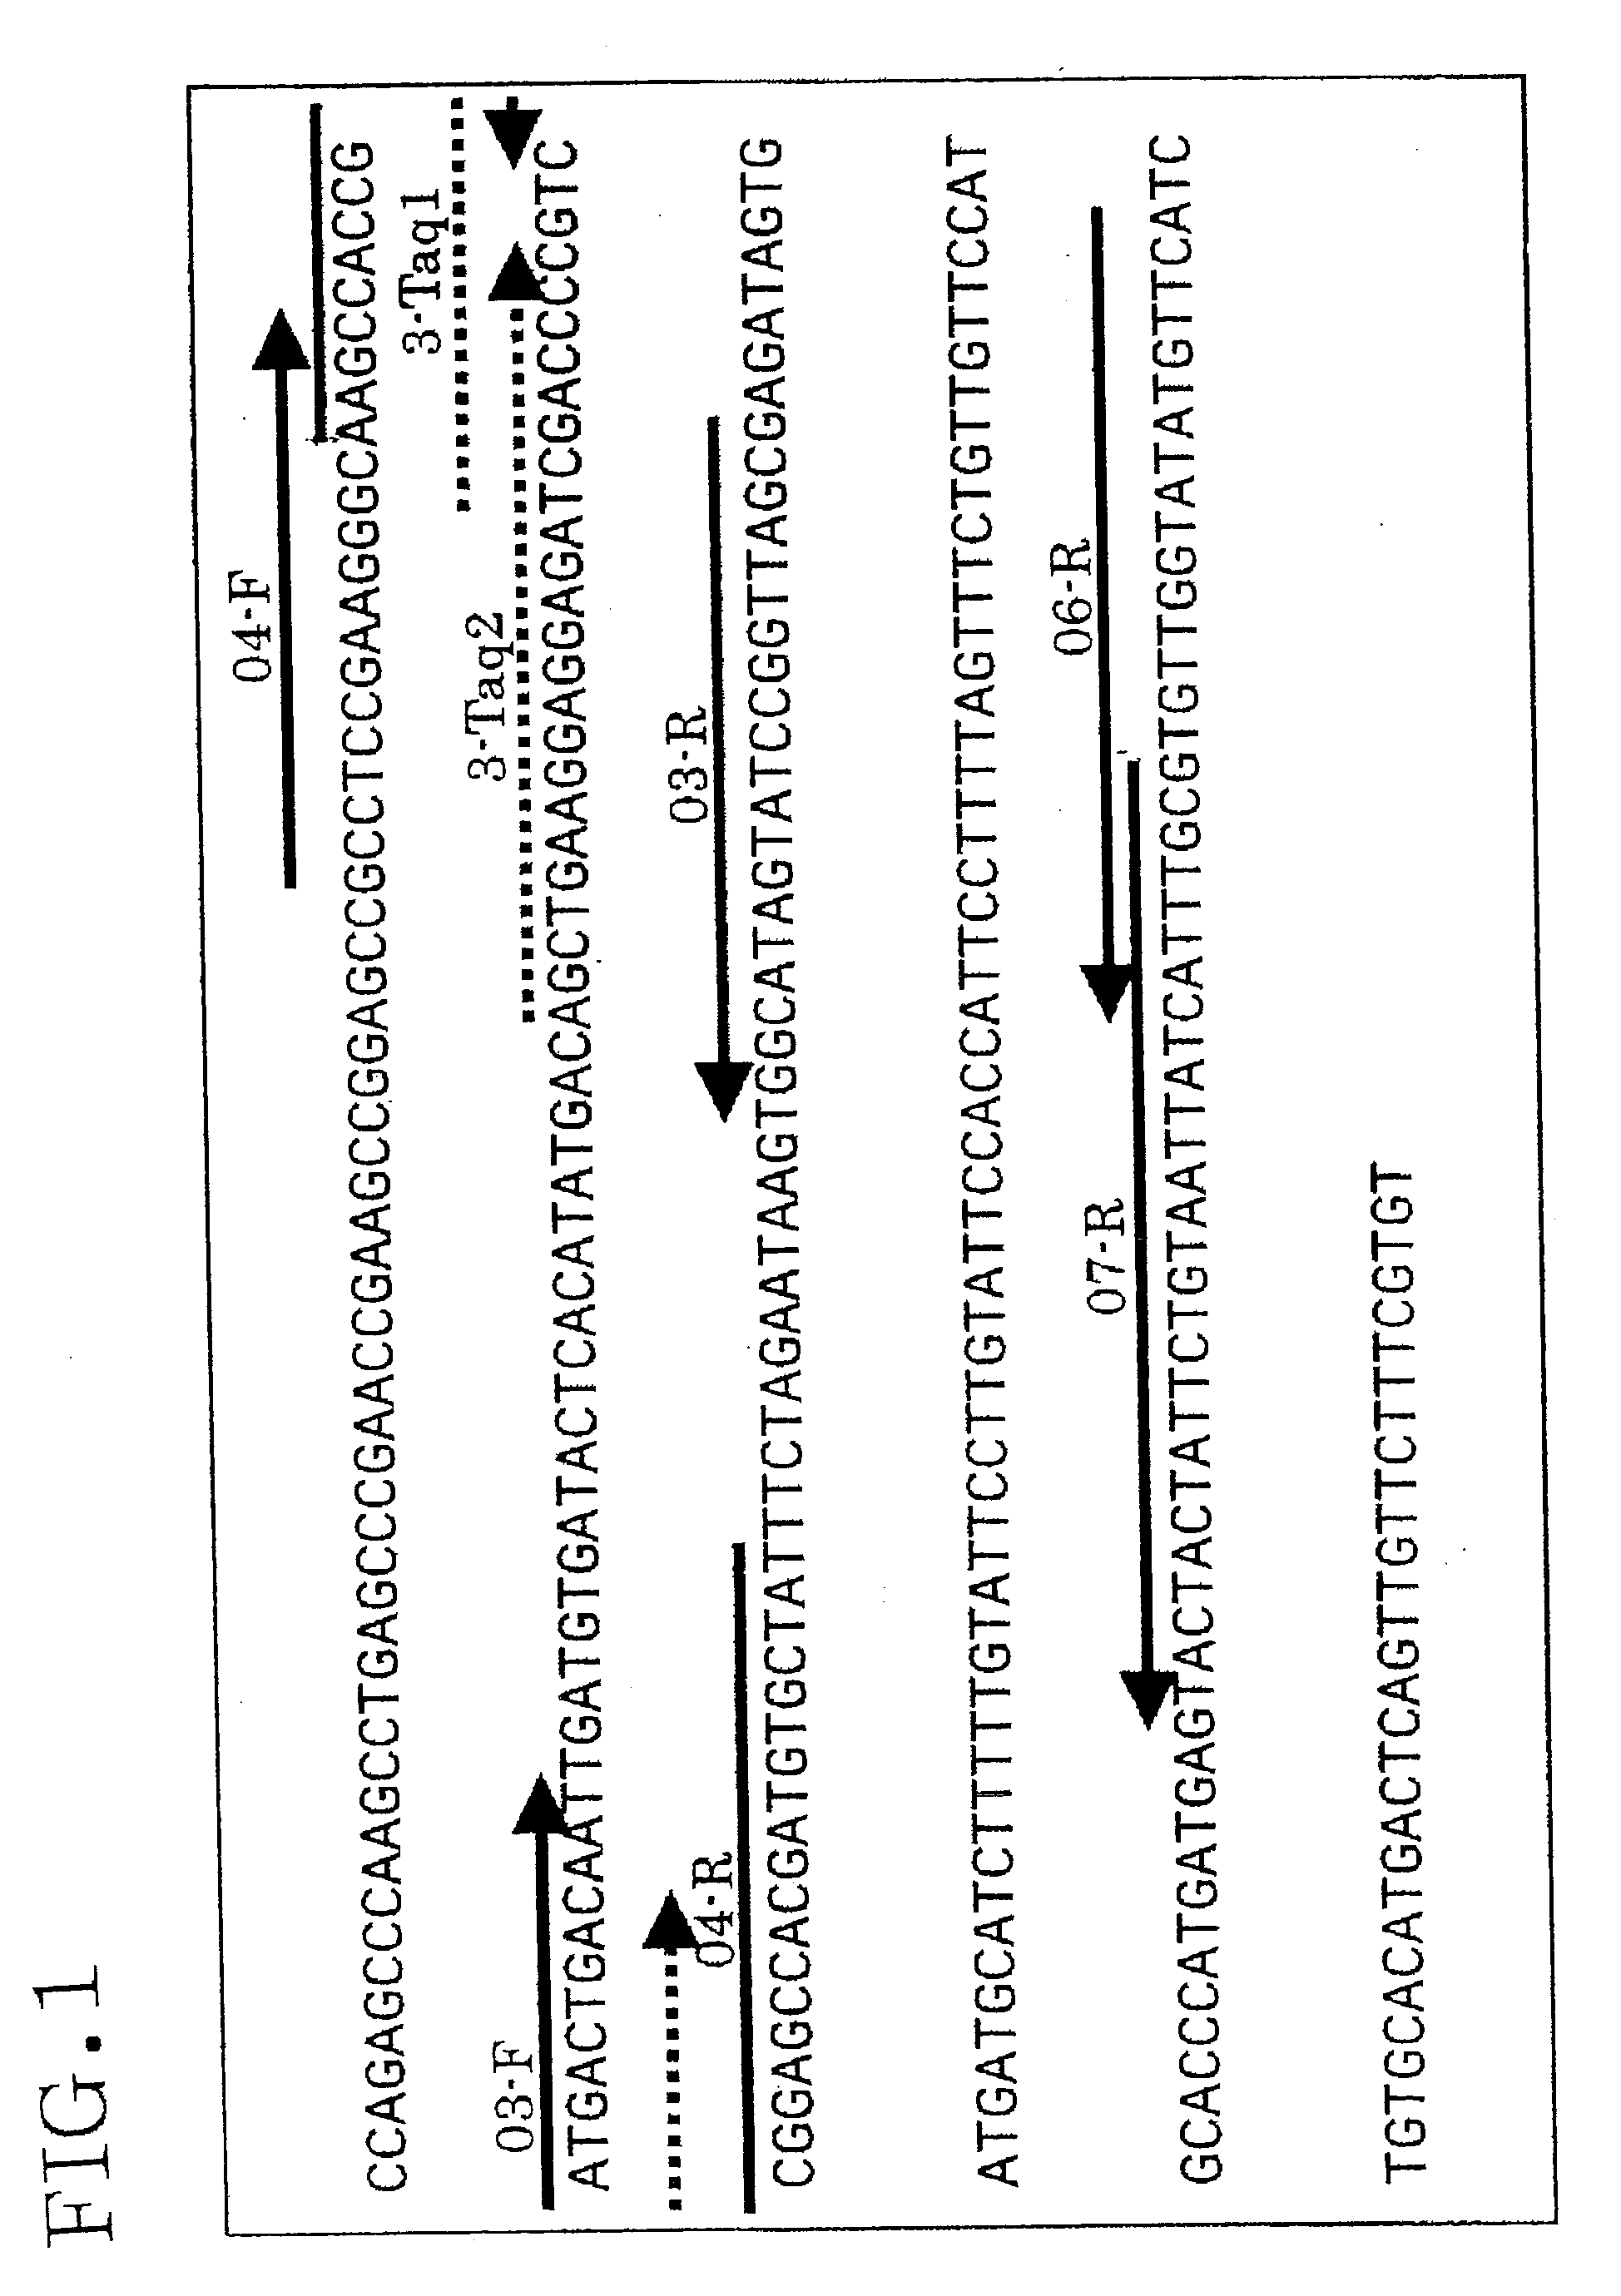 Method of detecting or quantitating endogenous wheat DNA and method of determining contamination rate of genetically modified wheat in test sample